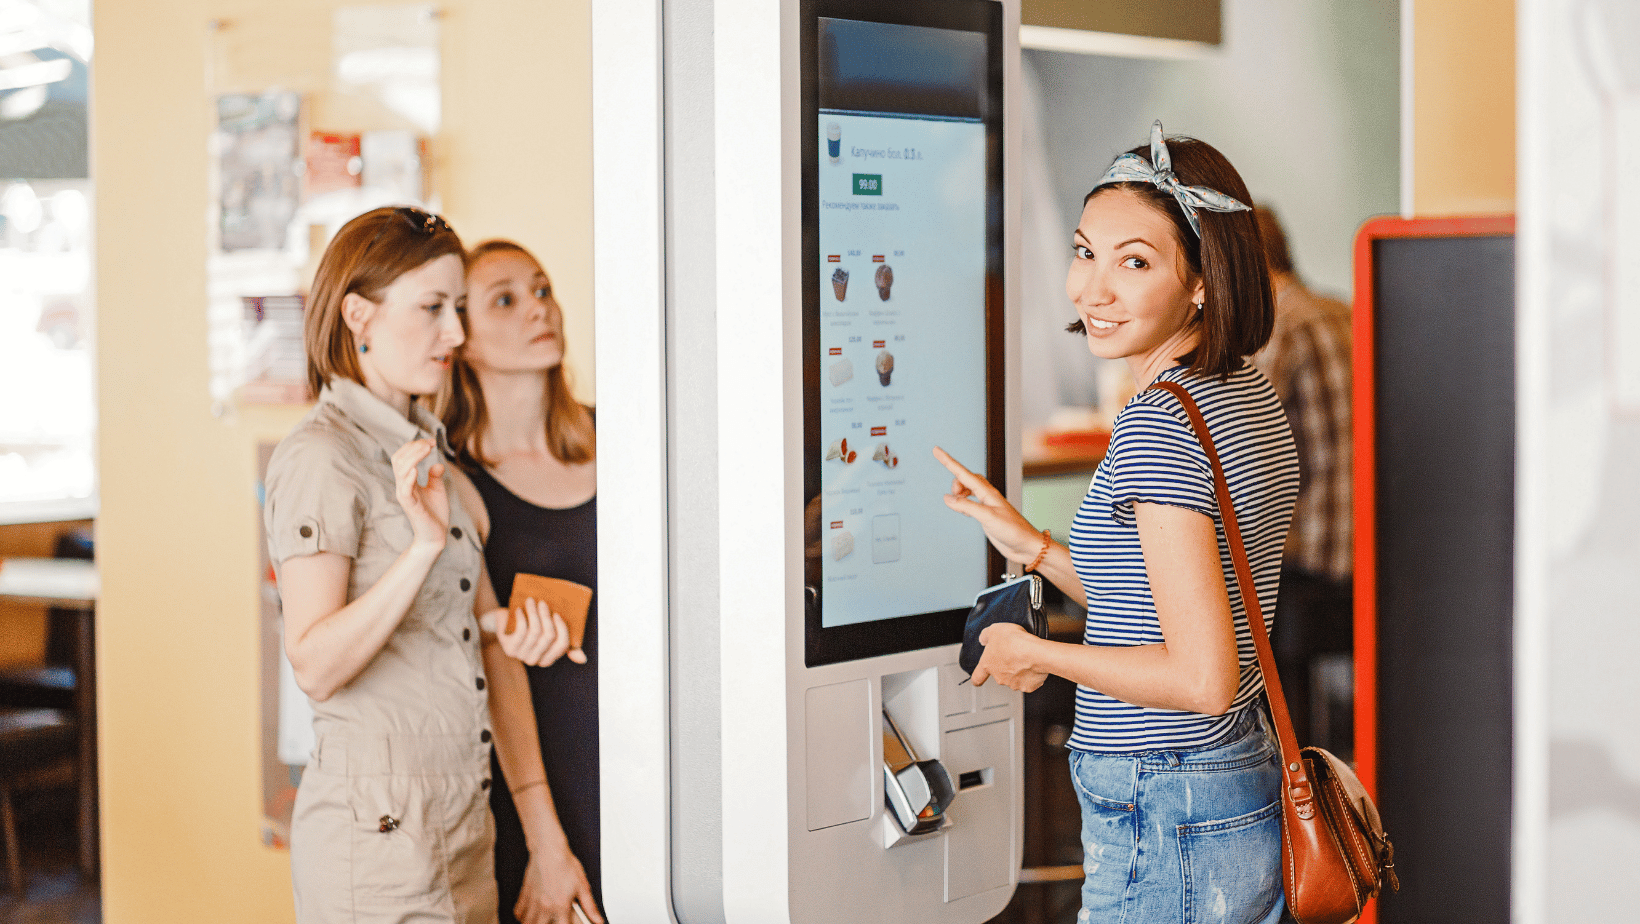 Friends ordering at a touch screen self service terminal in fast-food restaurant